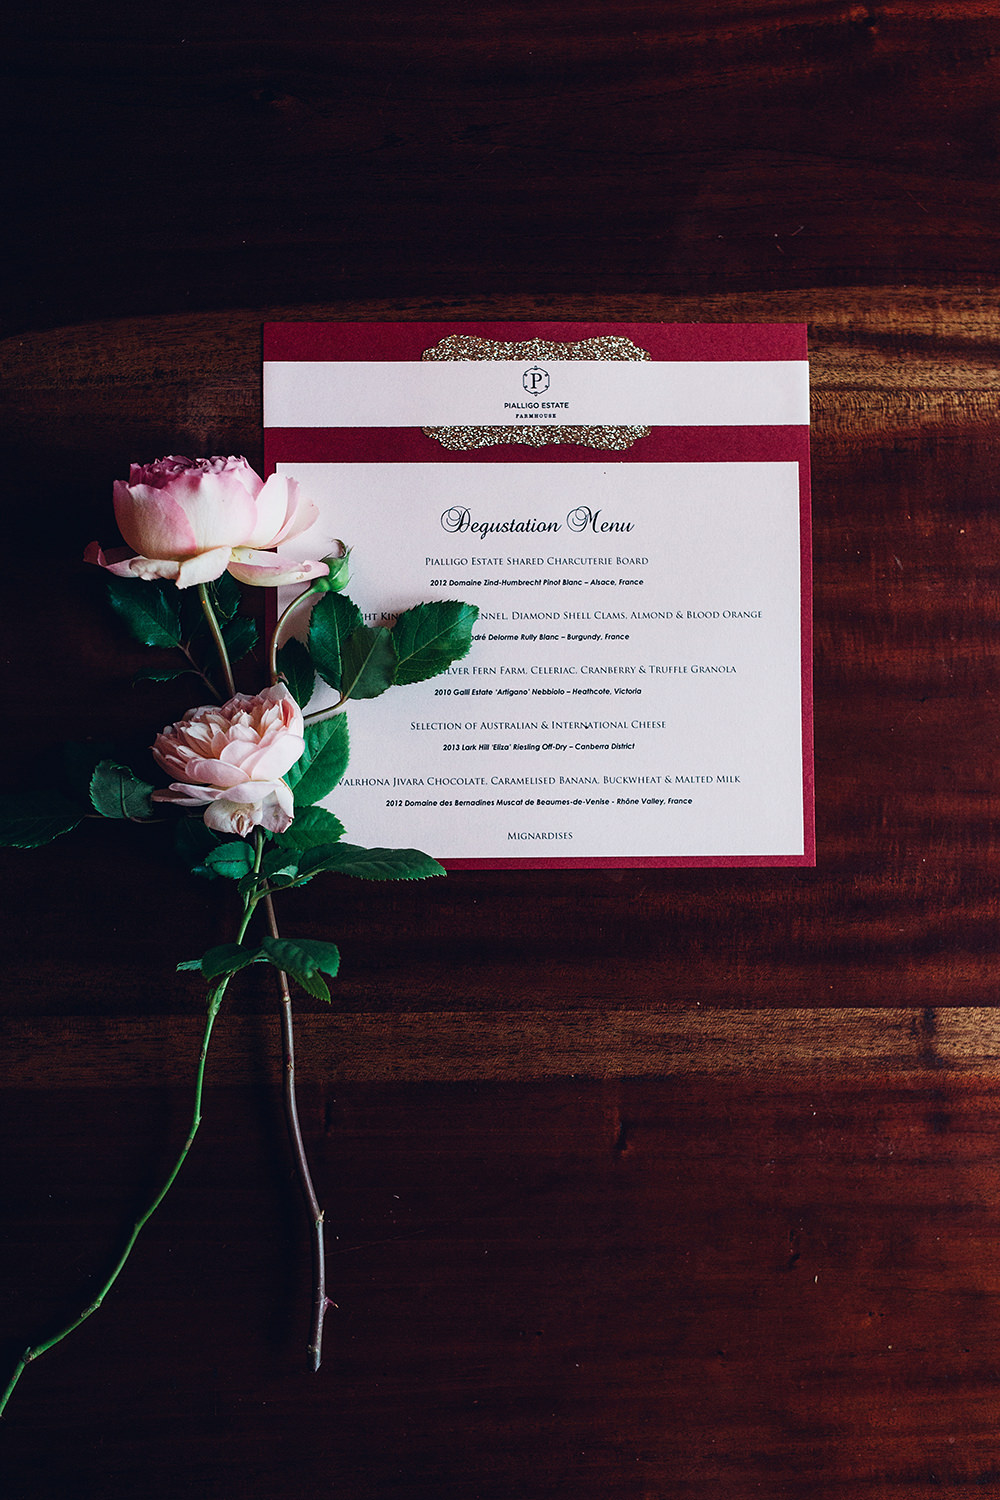 The same color scheme was chosen for the menus and invitations